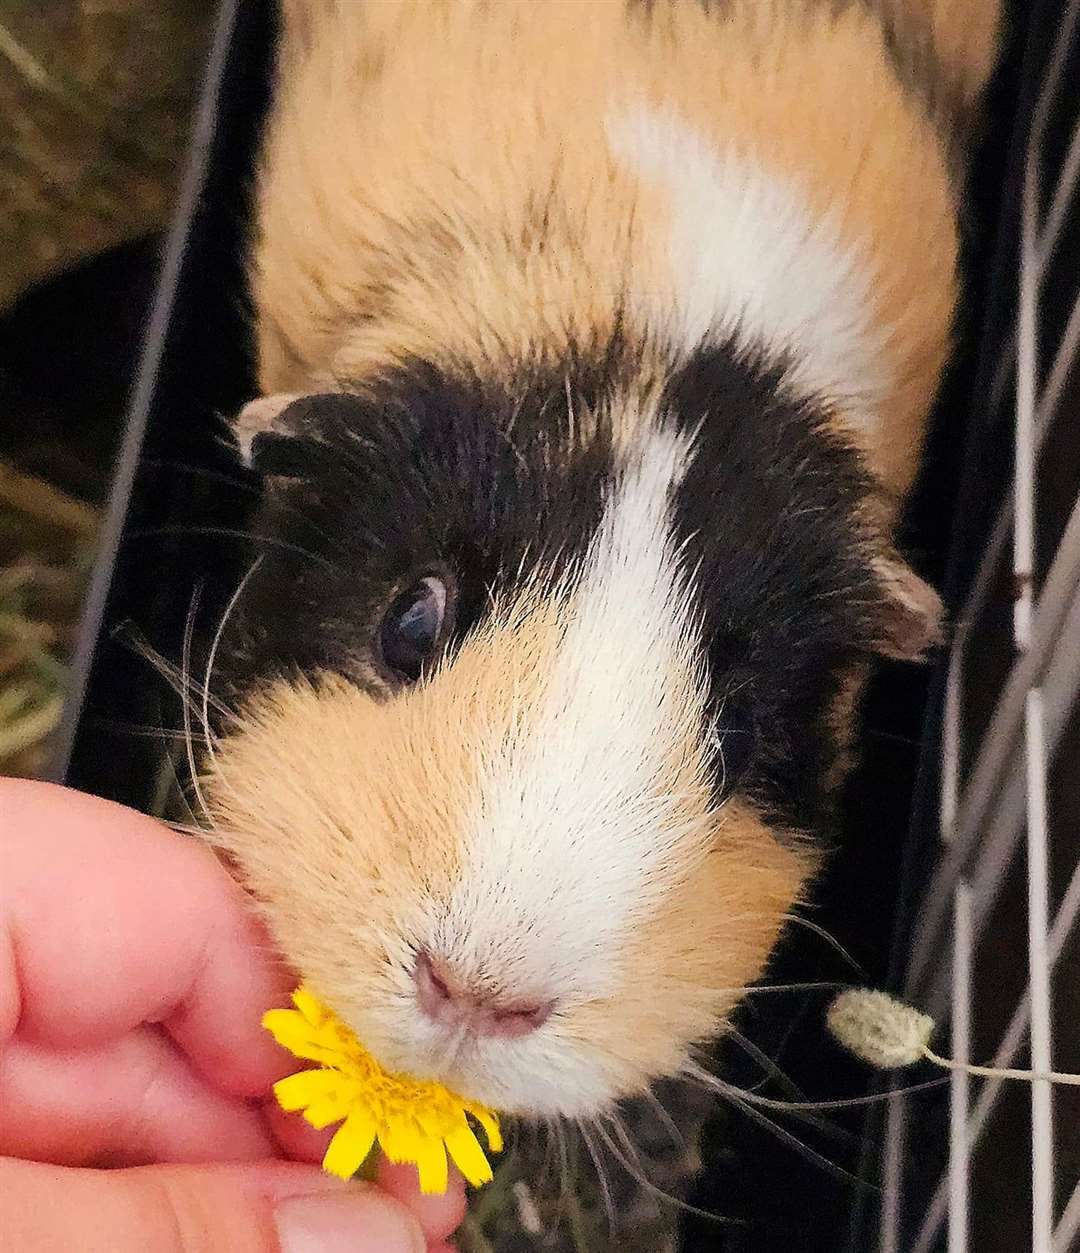 Emma Edwards' rescue guinea pig Cappuccino is eight